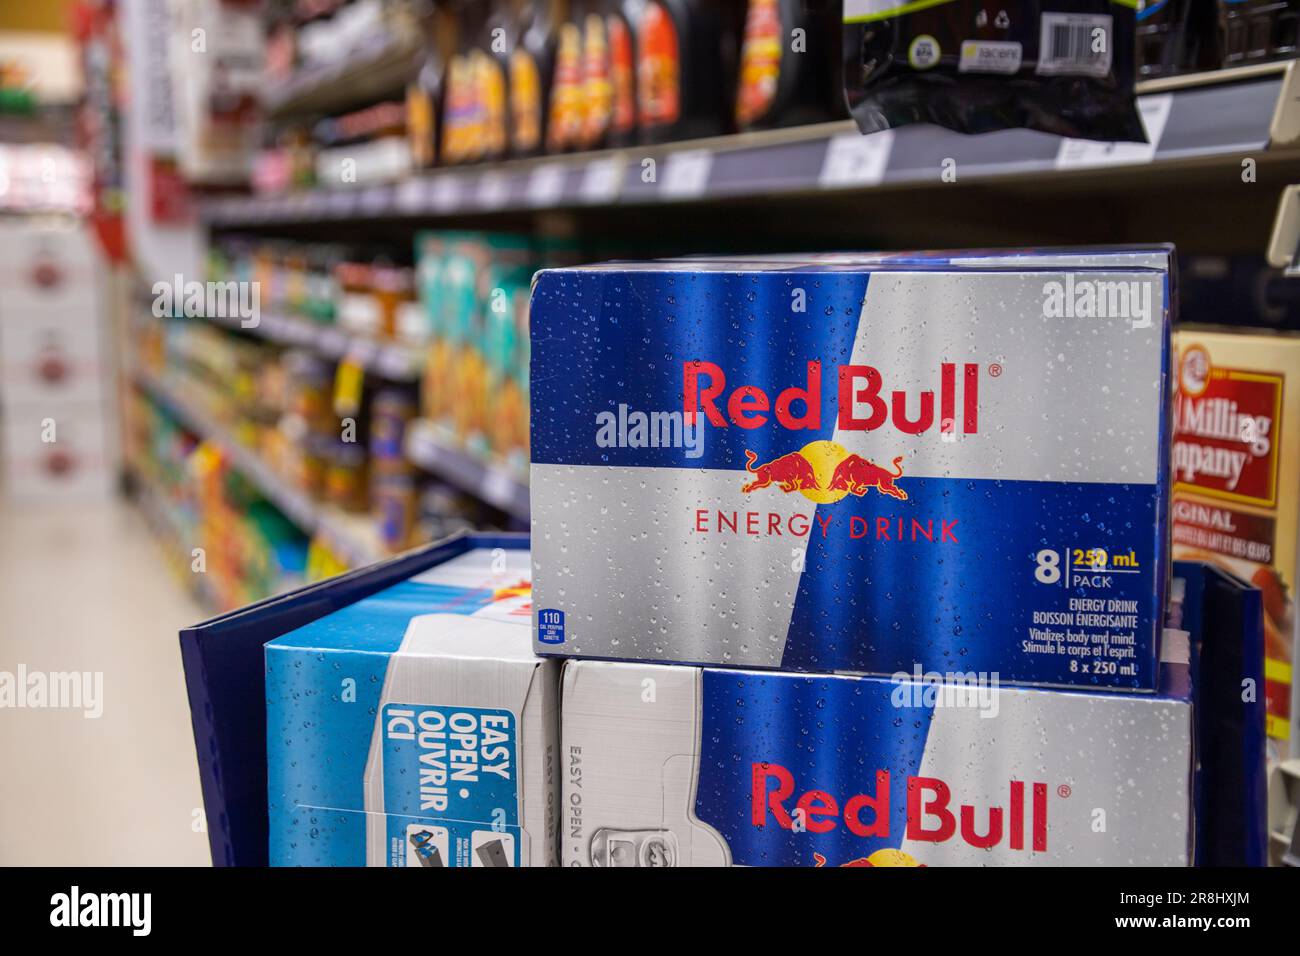 8 cans pack of Red Bull is displayed in the grocery store. Red Bull is a popular energy drink brand owned by the Austrian company Red Bull GmbH Stock Photo